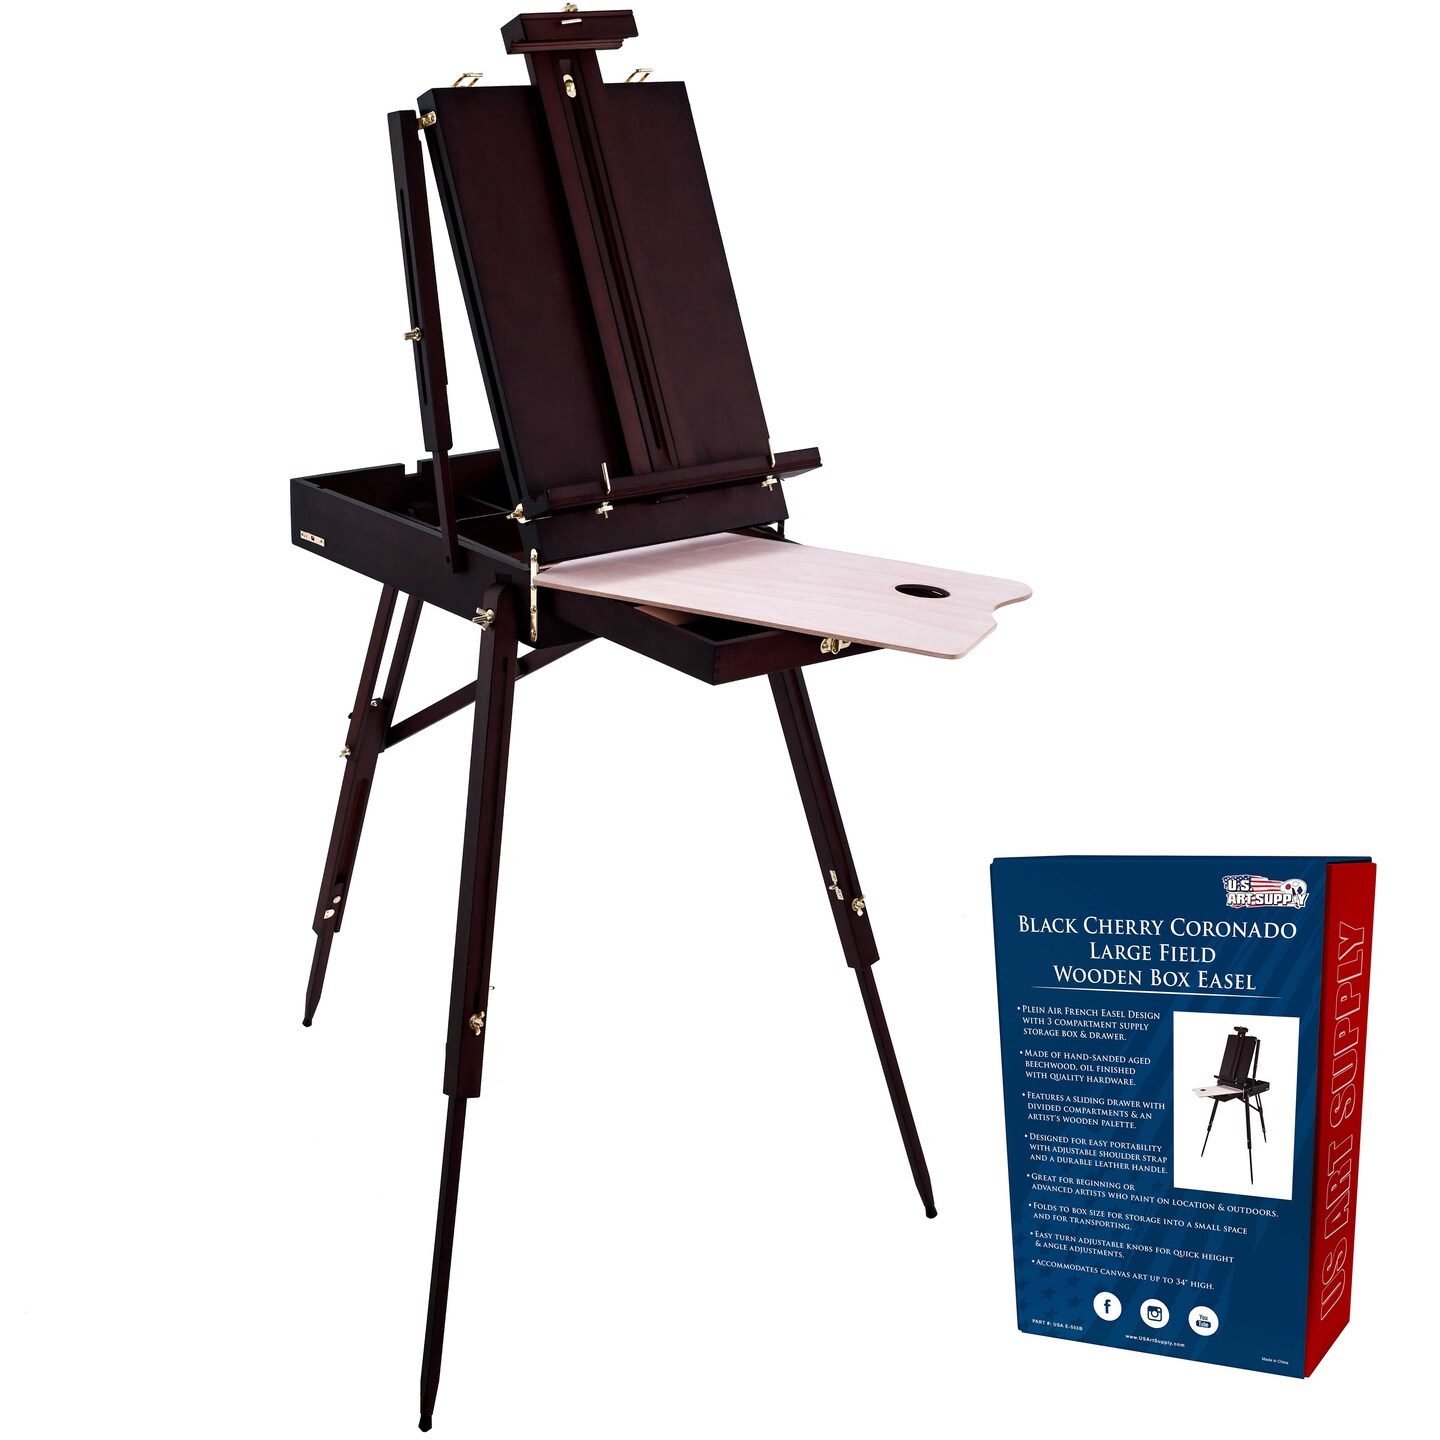 1pc Foldable Artist Easel, Sketch Stand, Adjustable Metal Display Easel,  Painting Drawing Stand With Carrying Bag Top Art Supplies, For Home Room  Living Room Office Decor, Free Shipping For New Users